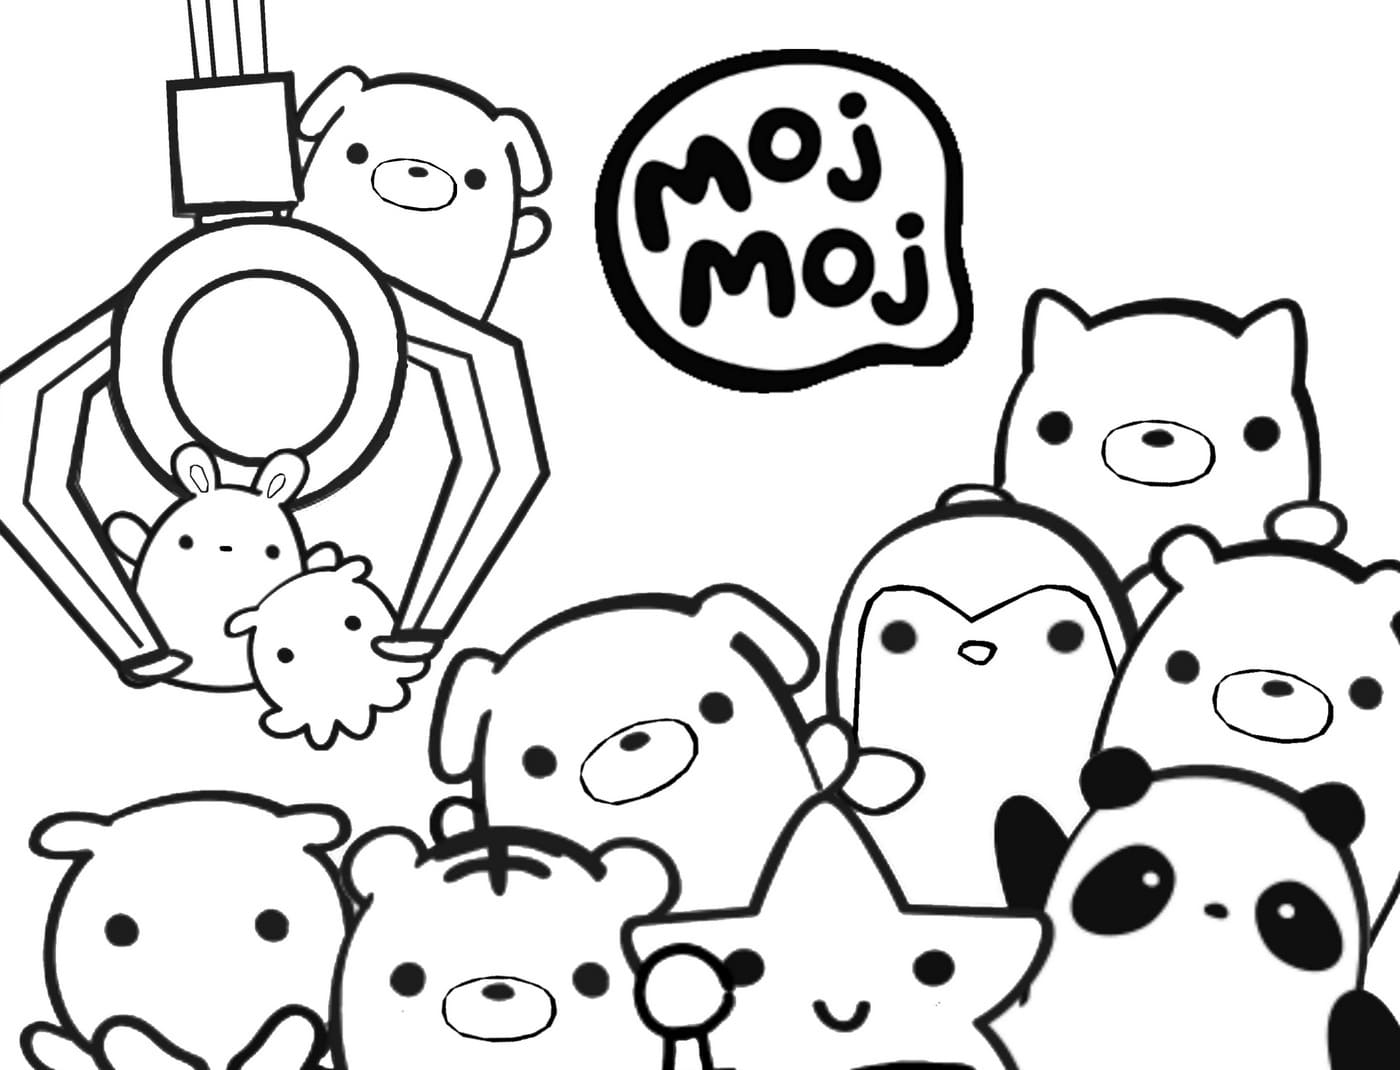 Squishmallows Coloring Pages   Printable Coloring Pages   Coloring ...